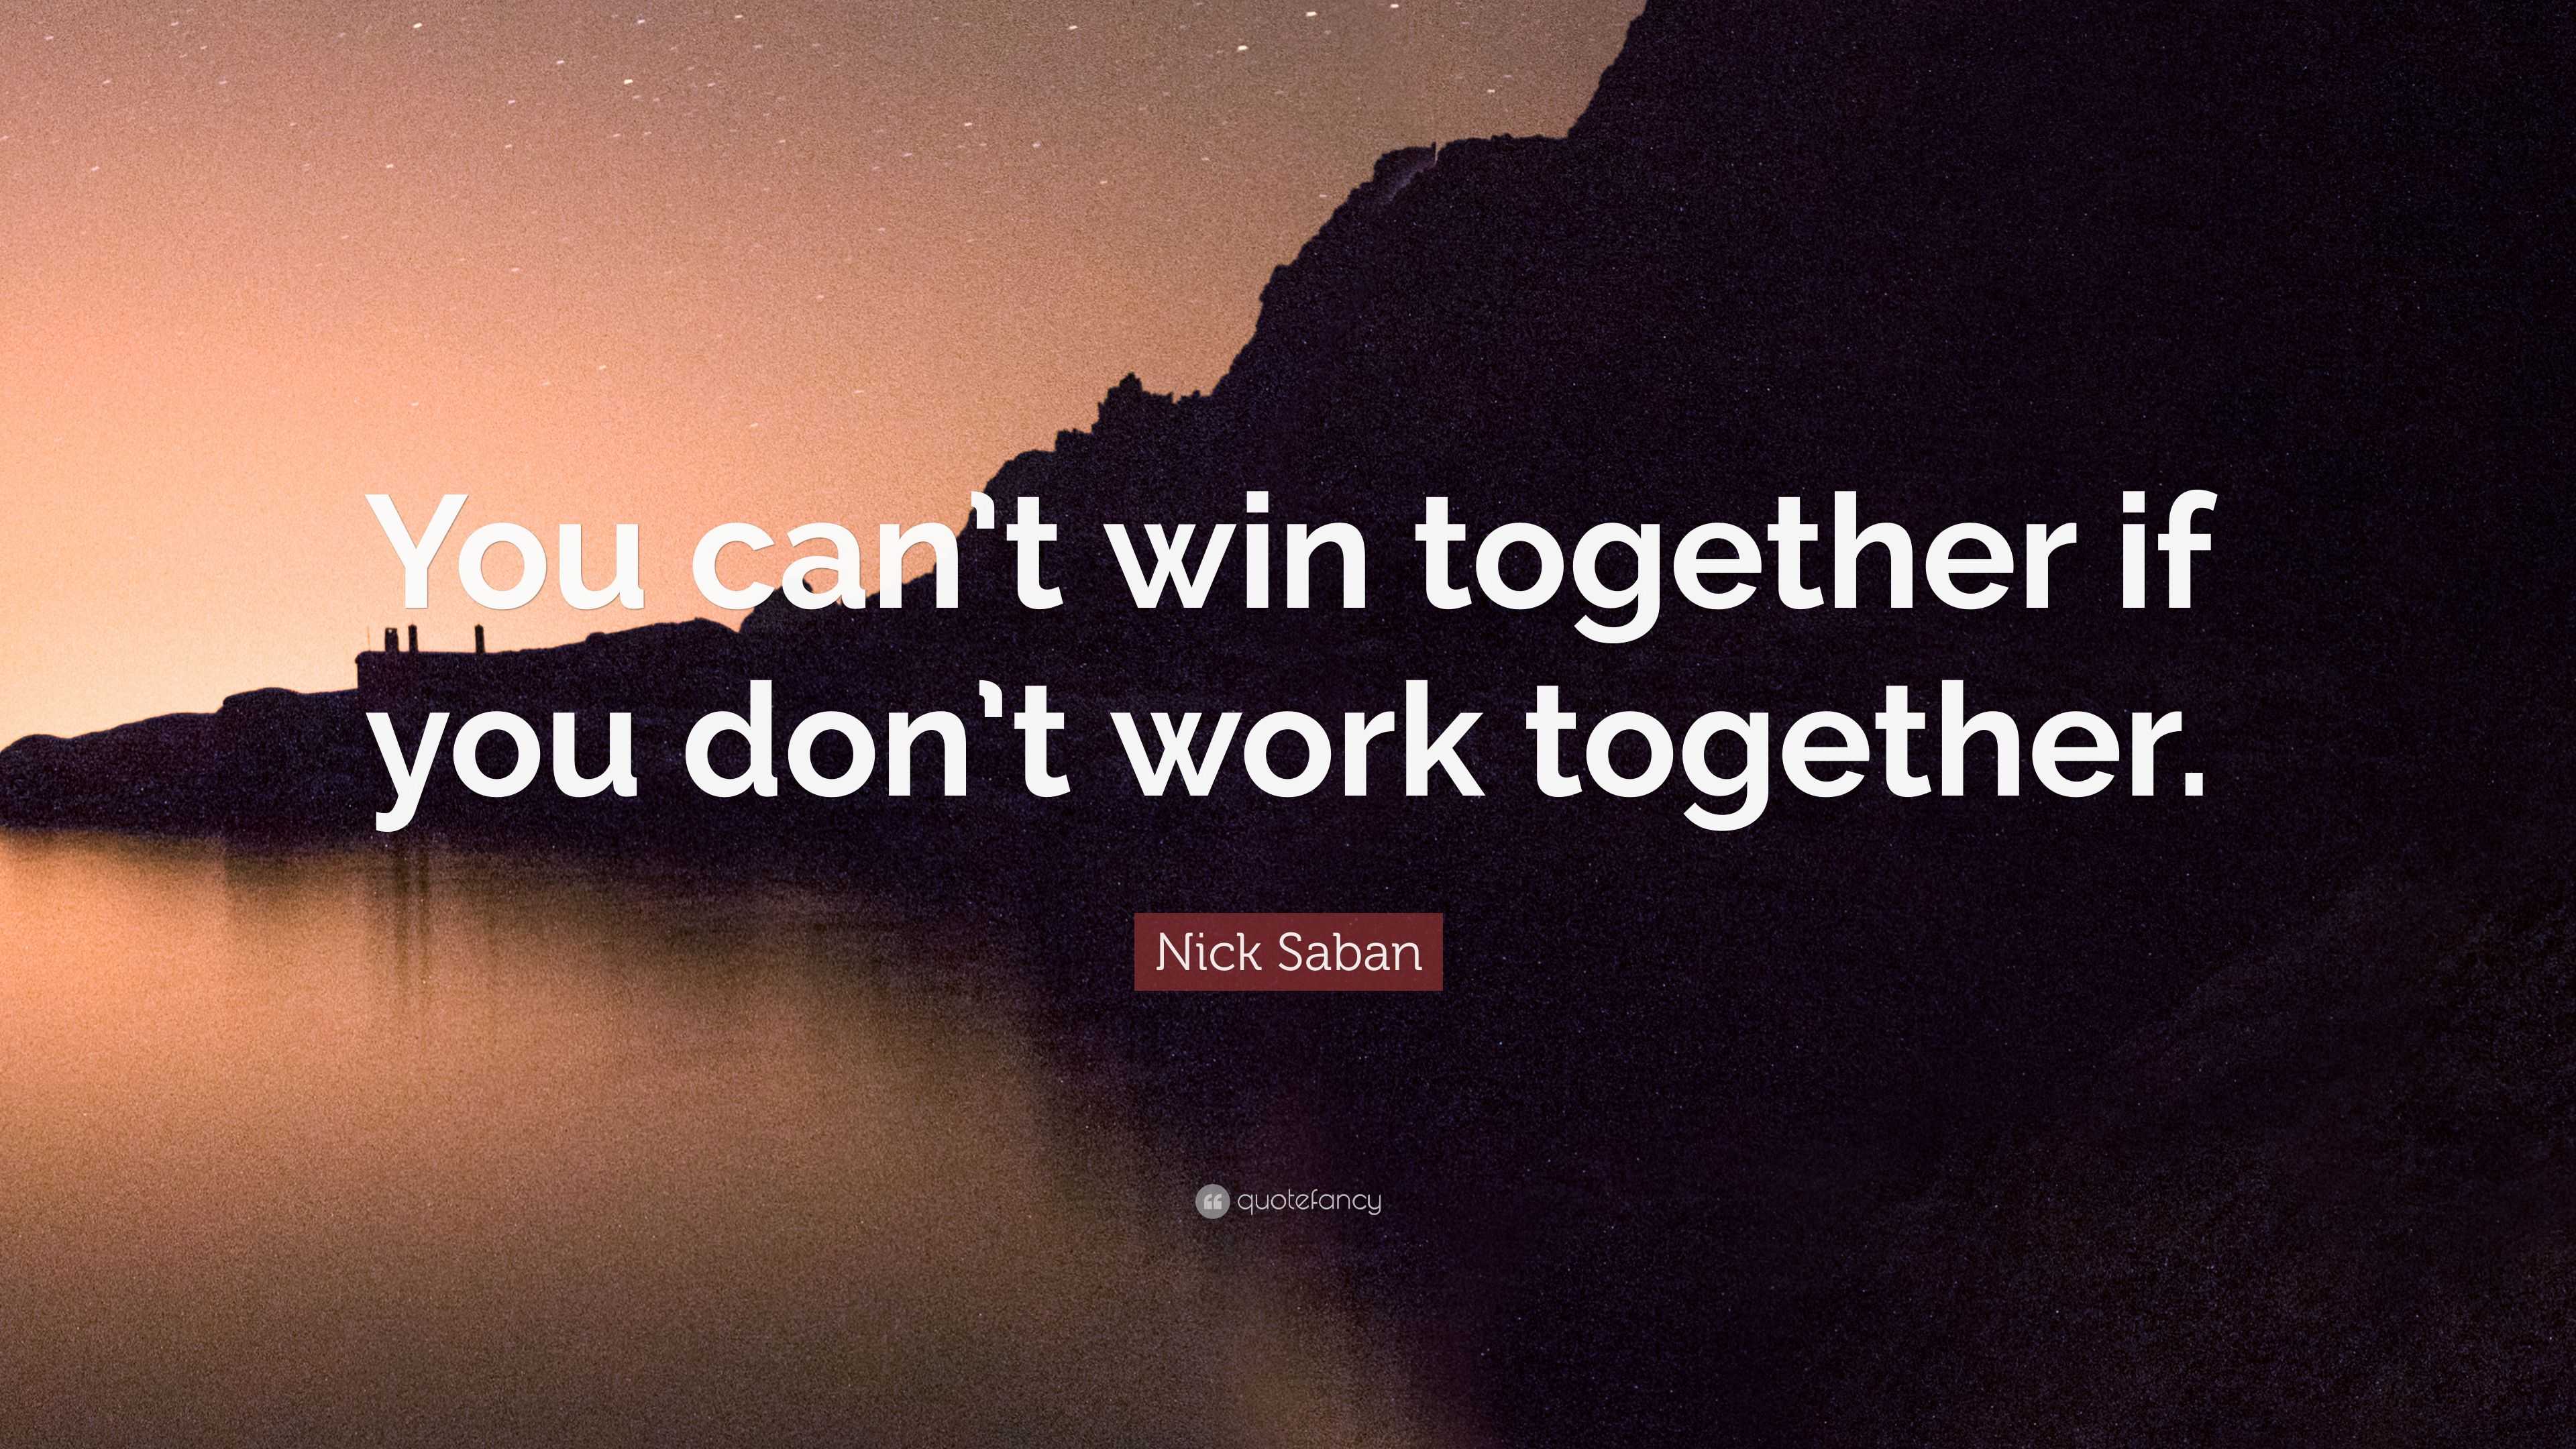 Nick Saban Quote “You can’t win together if you don’t